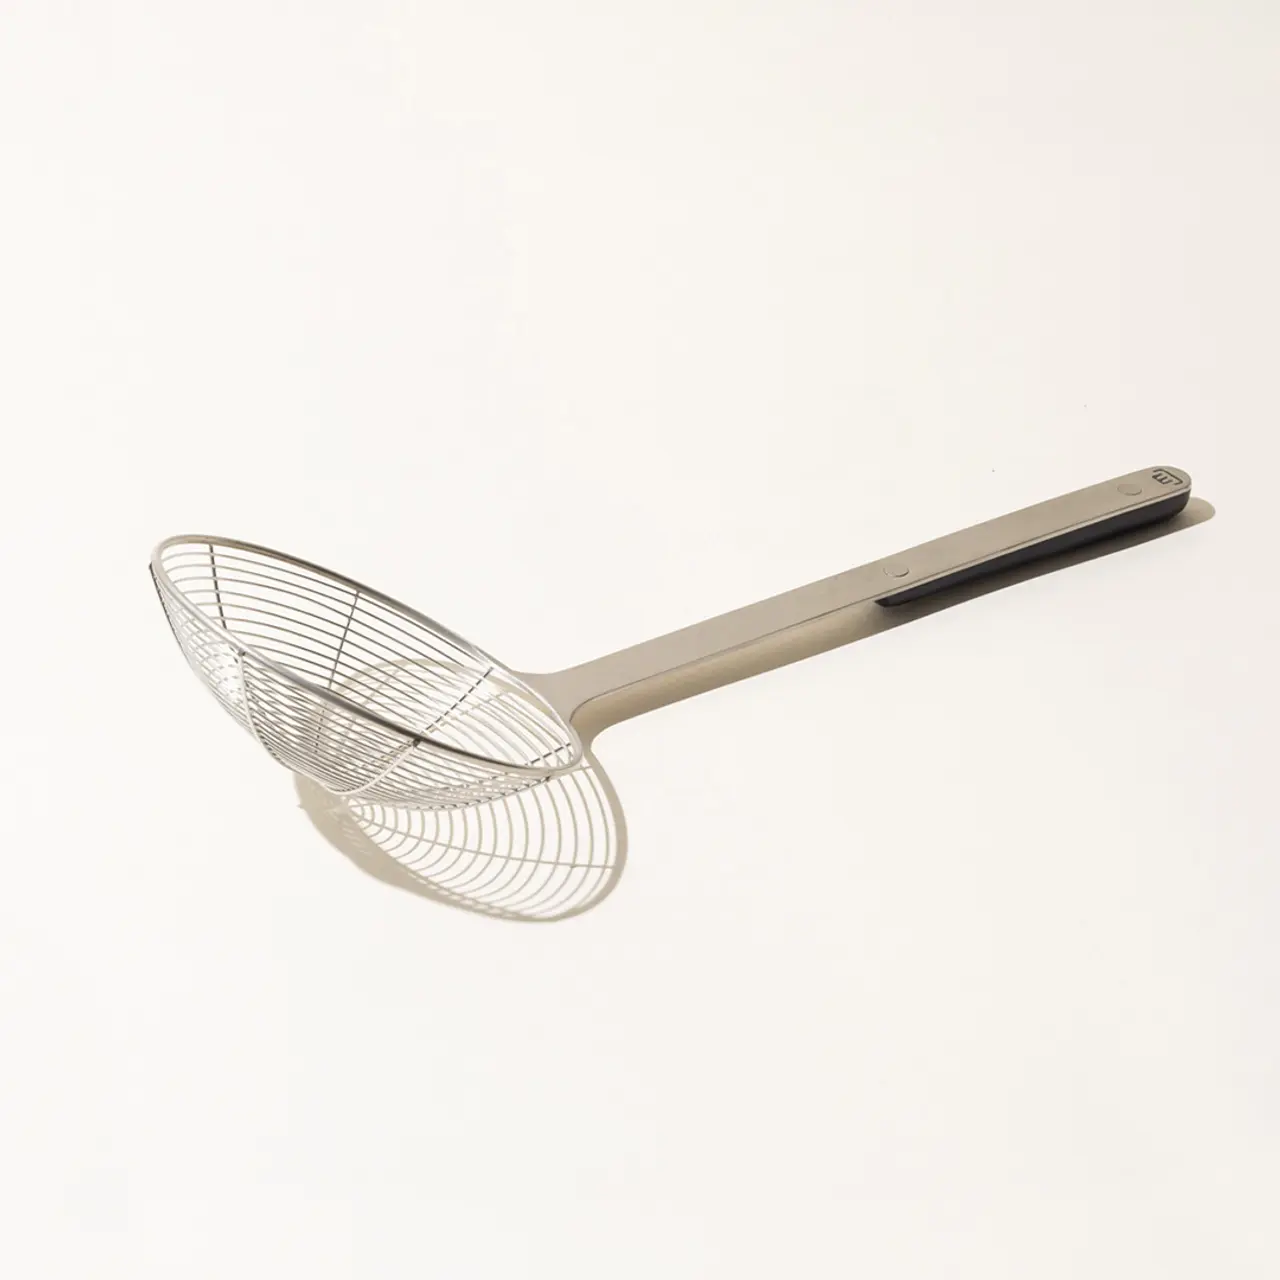 A stainless steel mesh strainer with a long handle isolated on a white background.